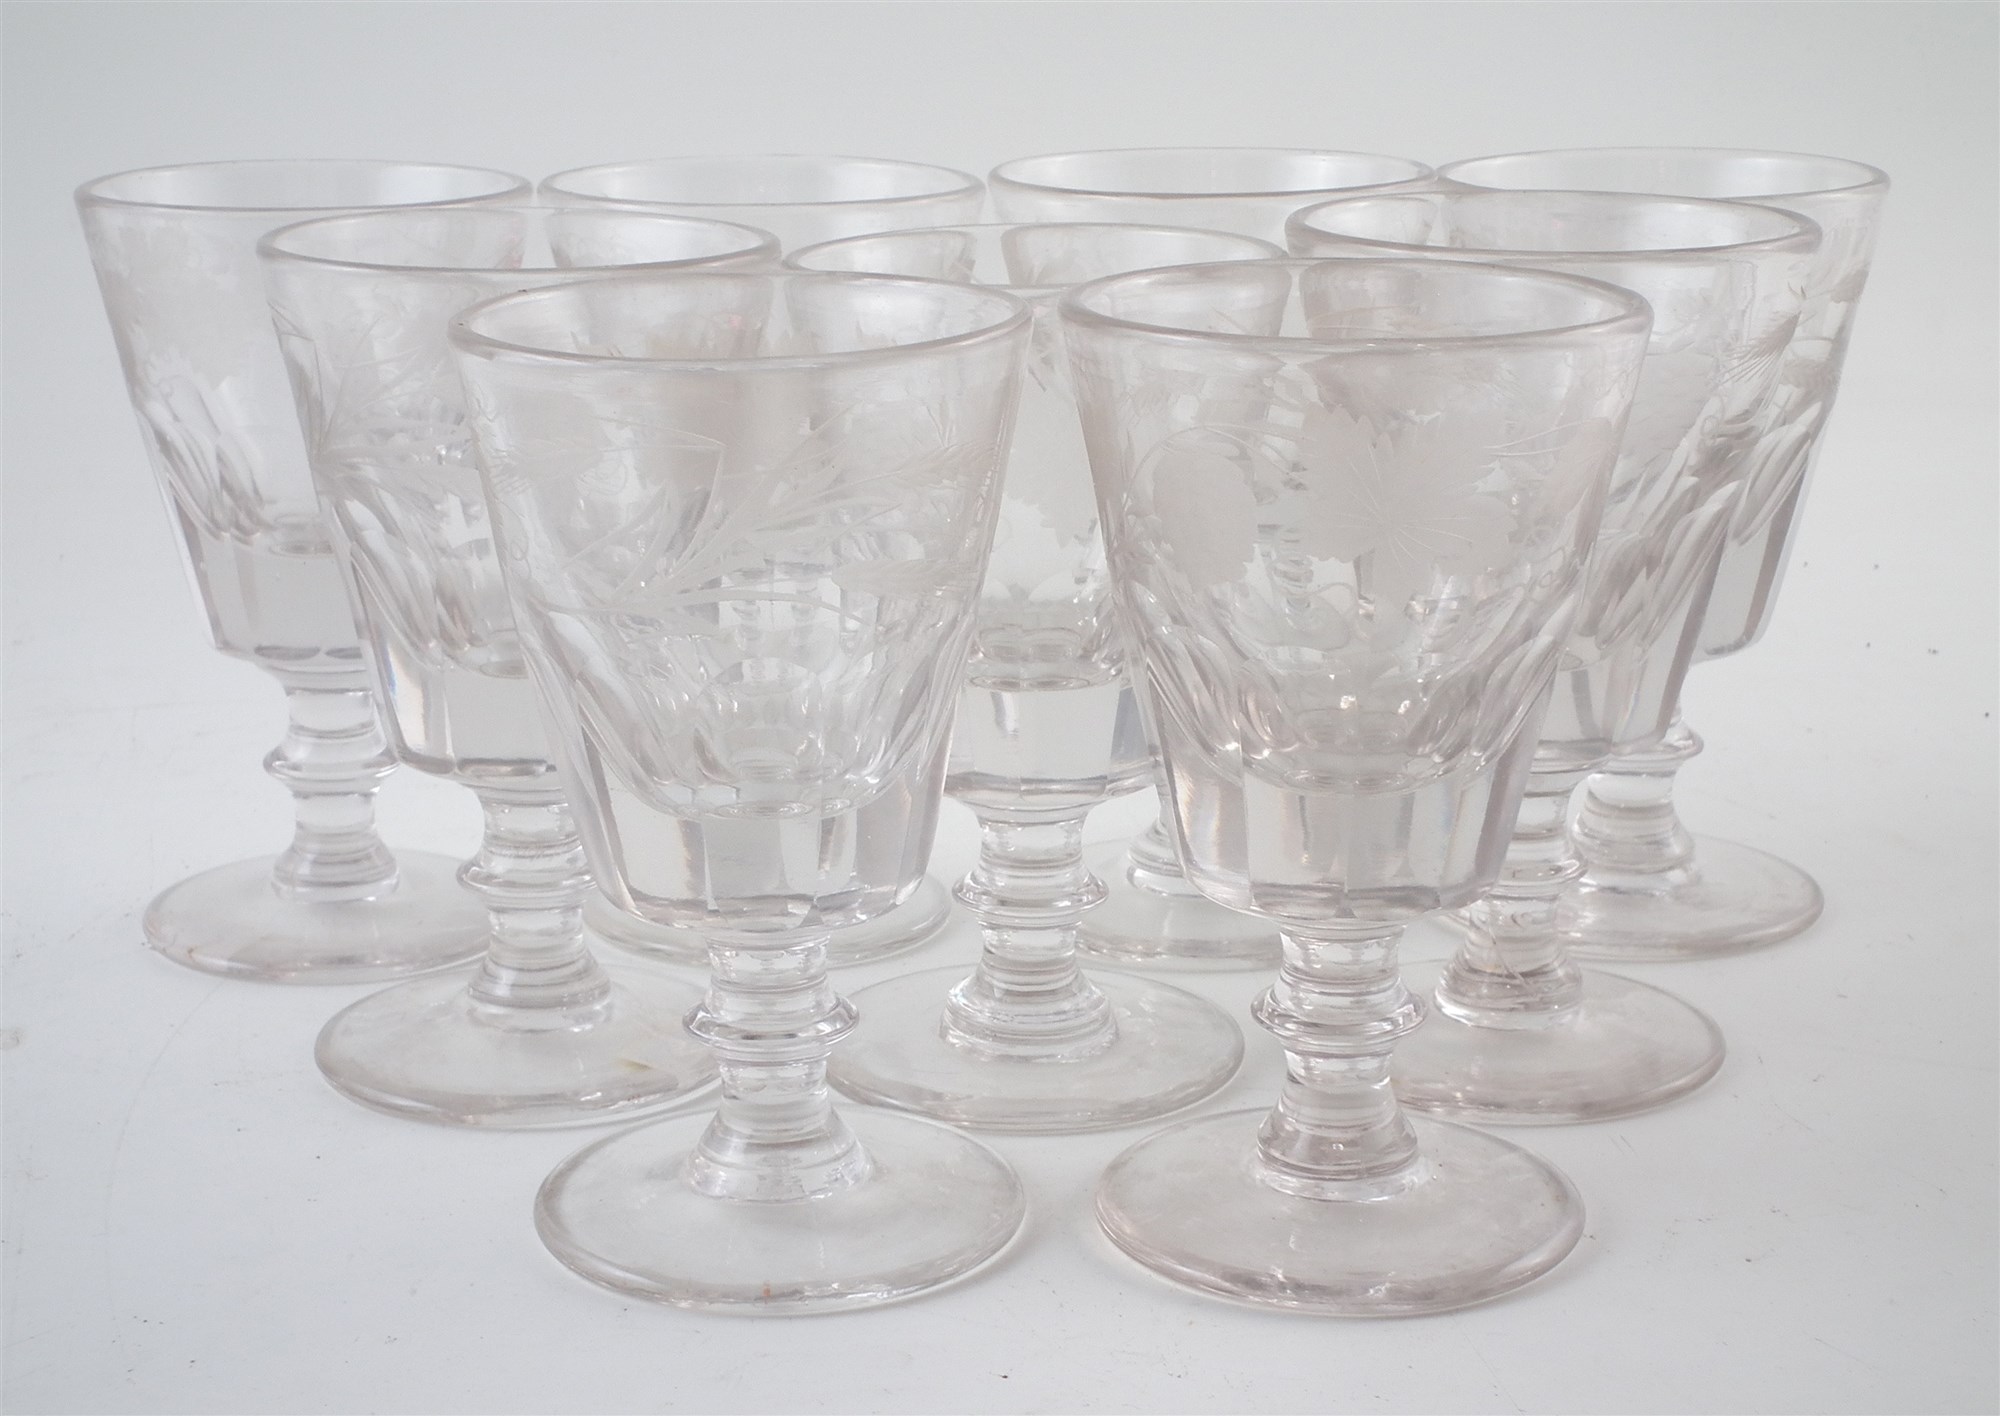 Nine mid 19th century ale glasses , the bowls engraved with hops, leaves and barley, 12.5cm high For - Image 4 of 4